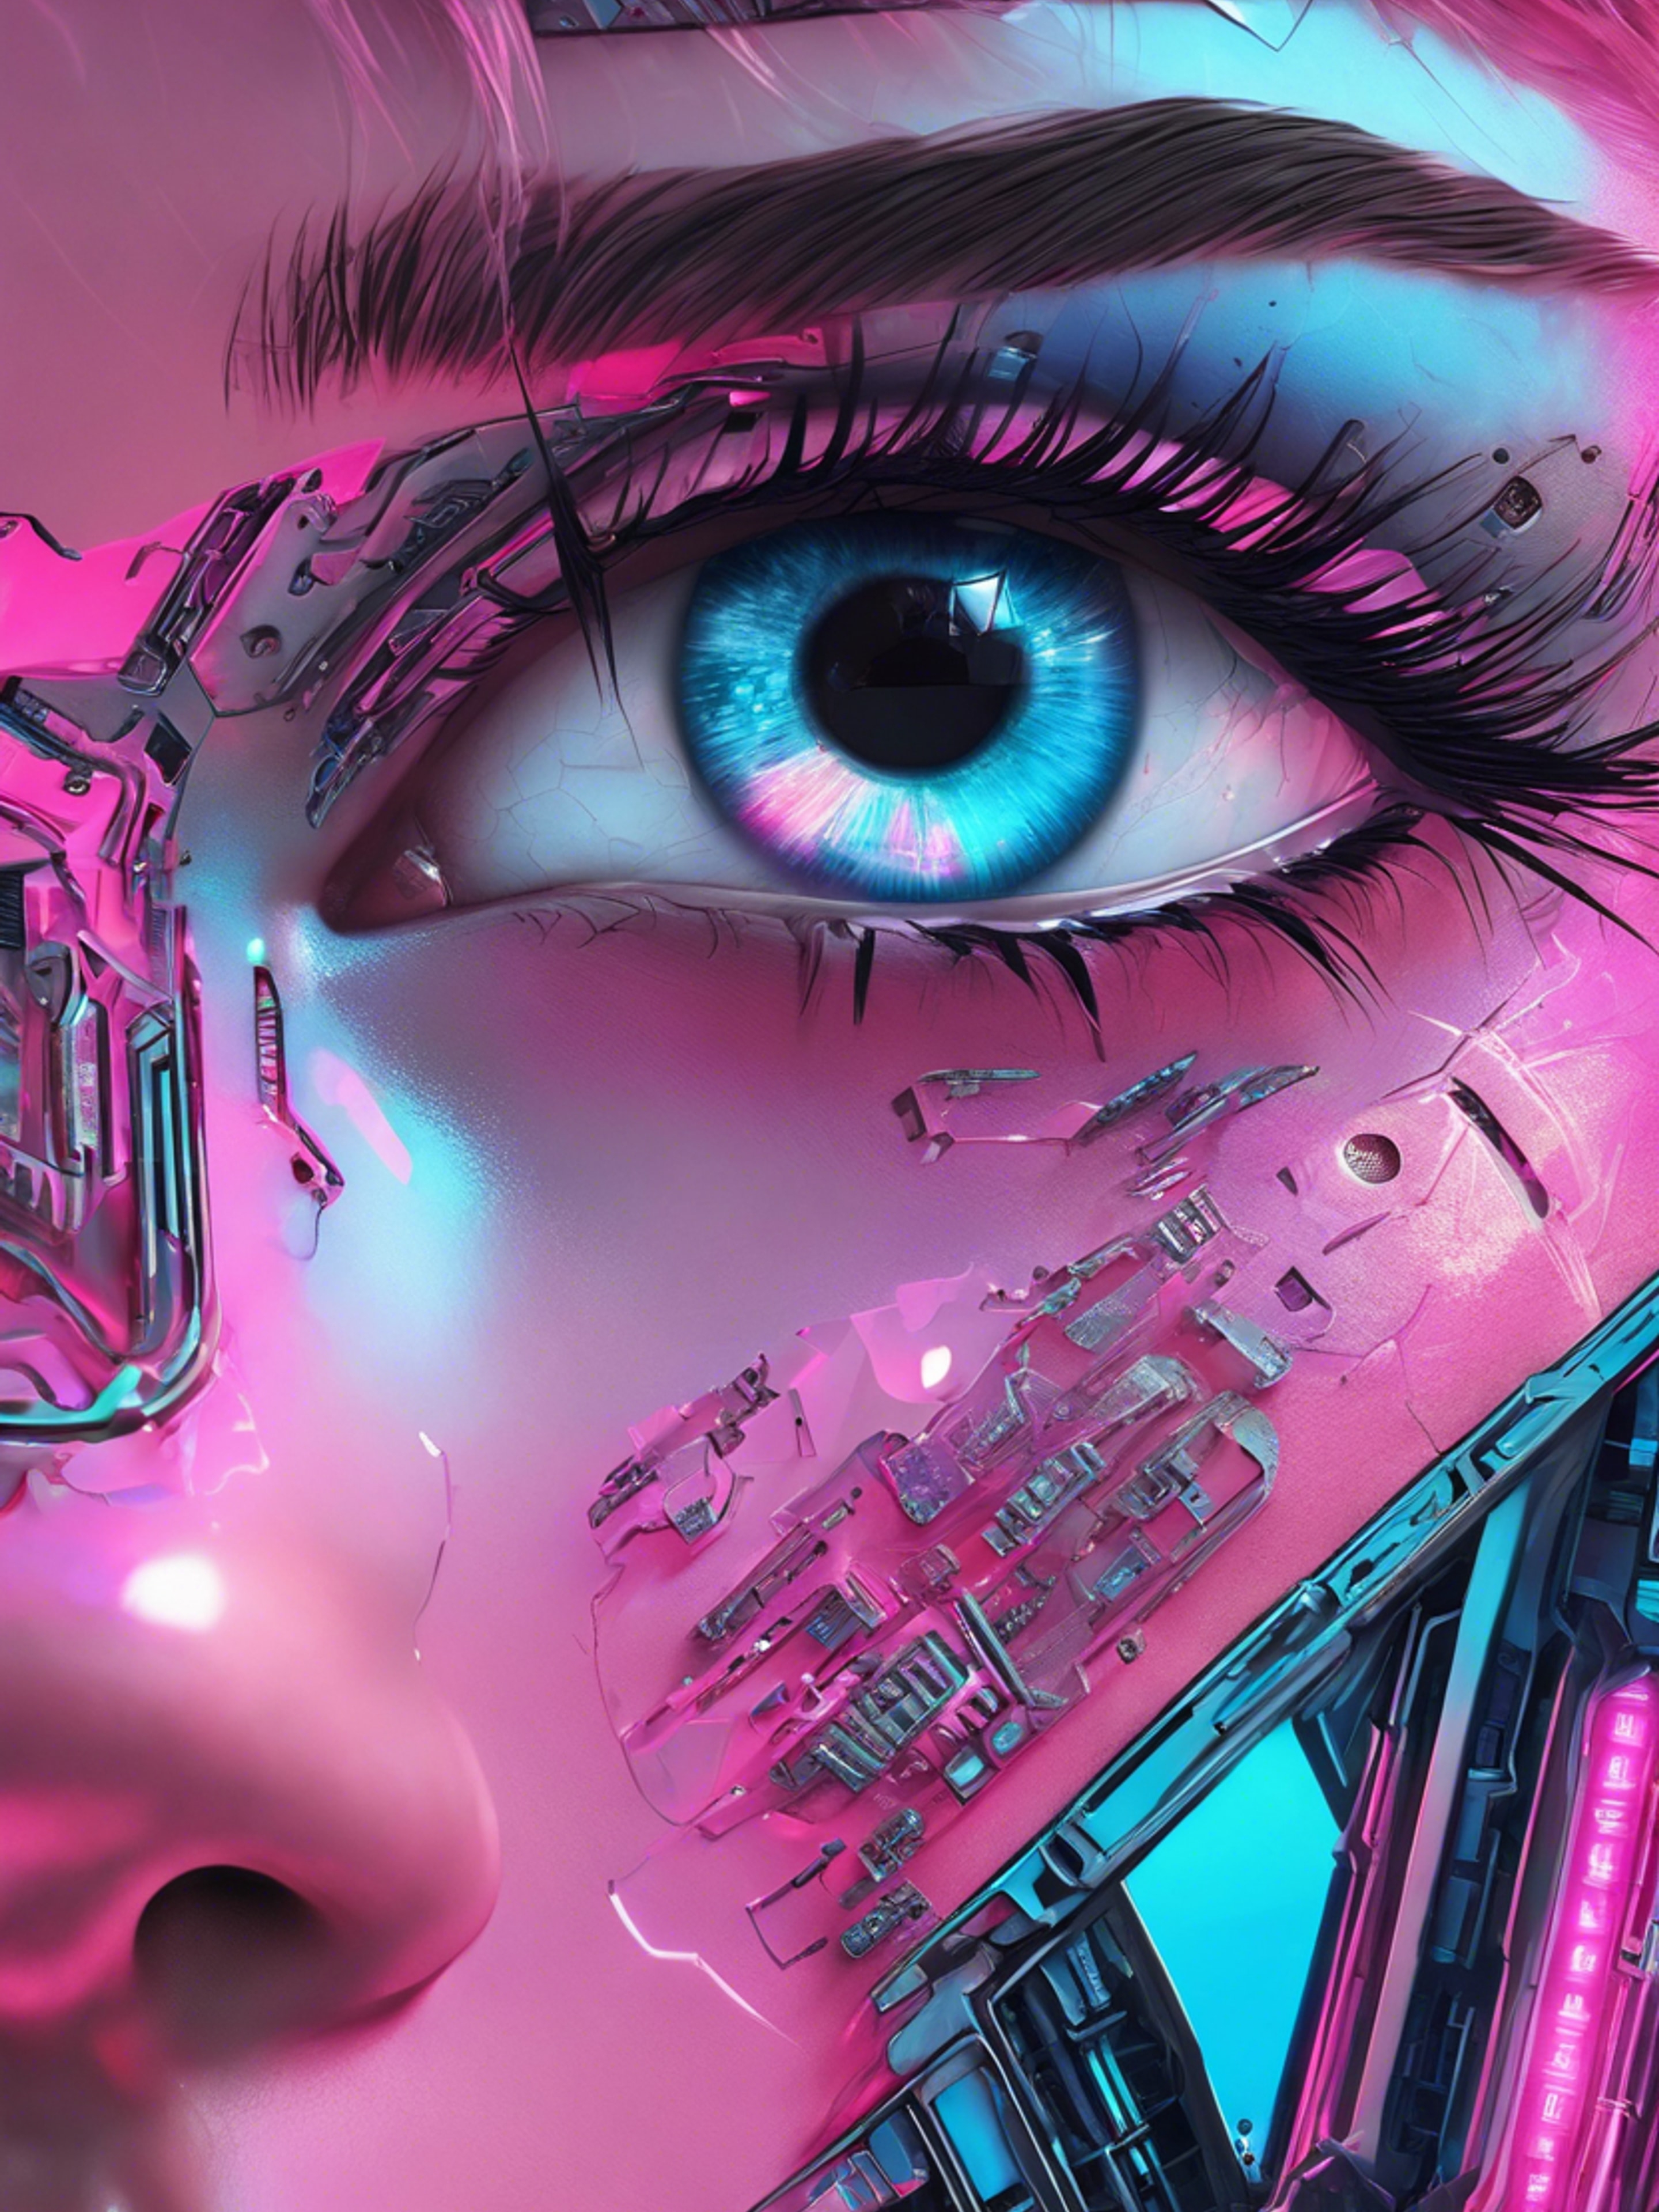 A close-up of a cyberpunk girl's eye, reflecting pink and blue city lights. 벽지[805009a14d1a4c10afac]